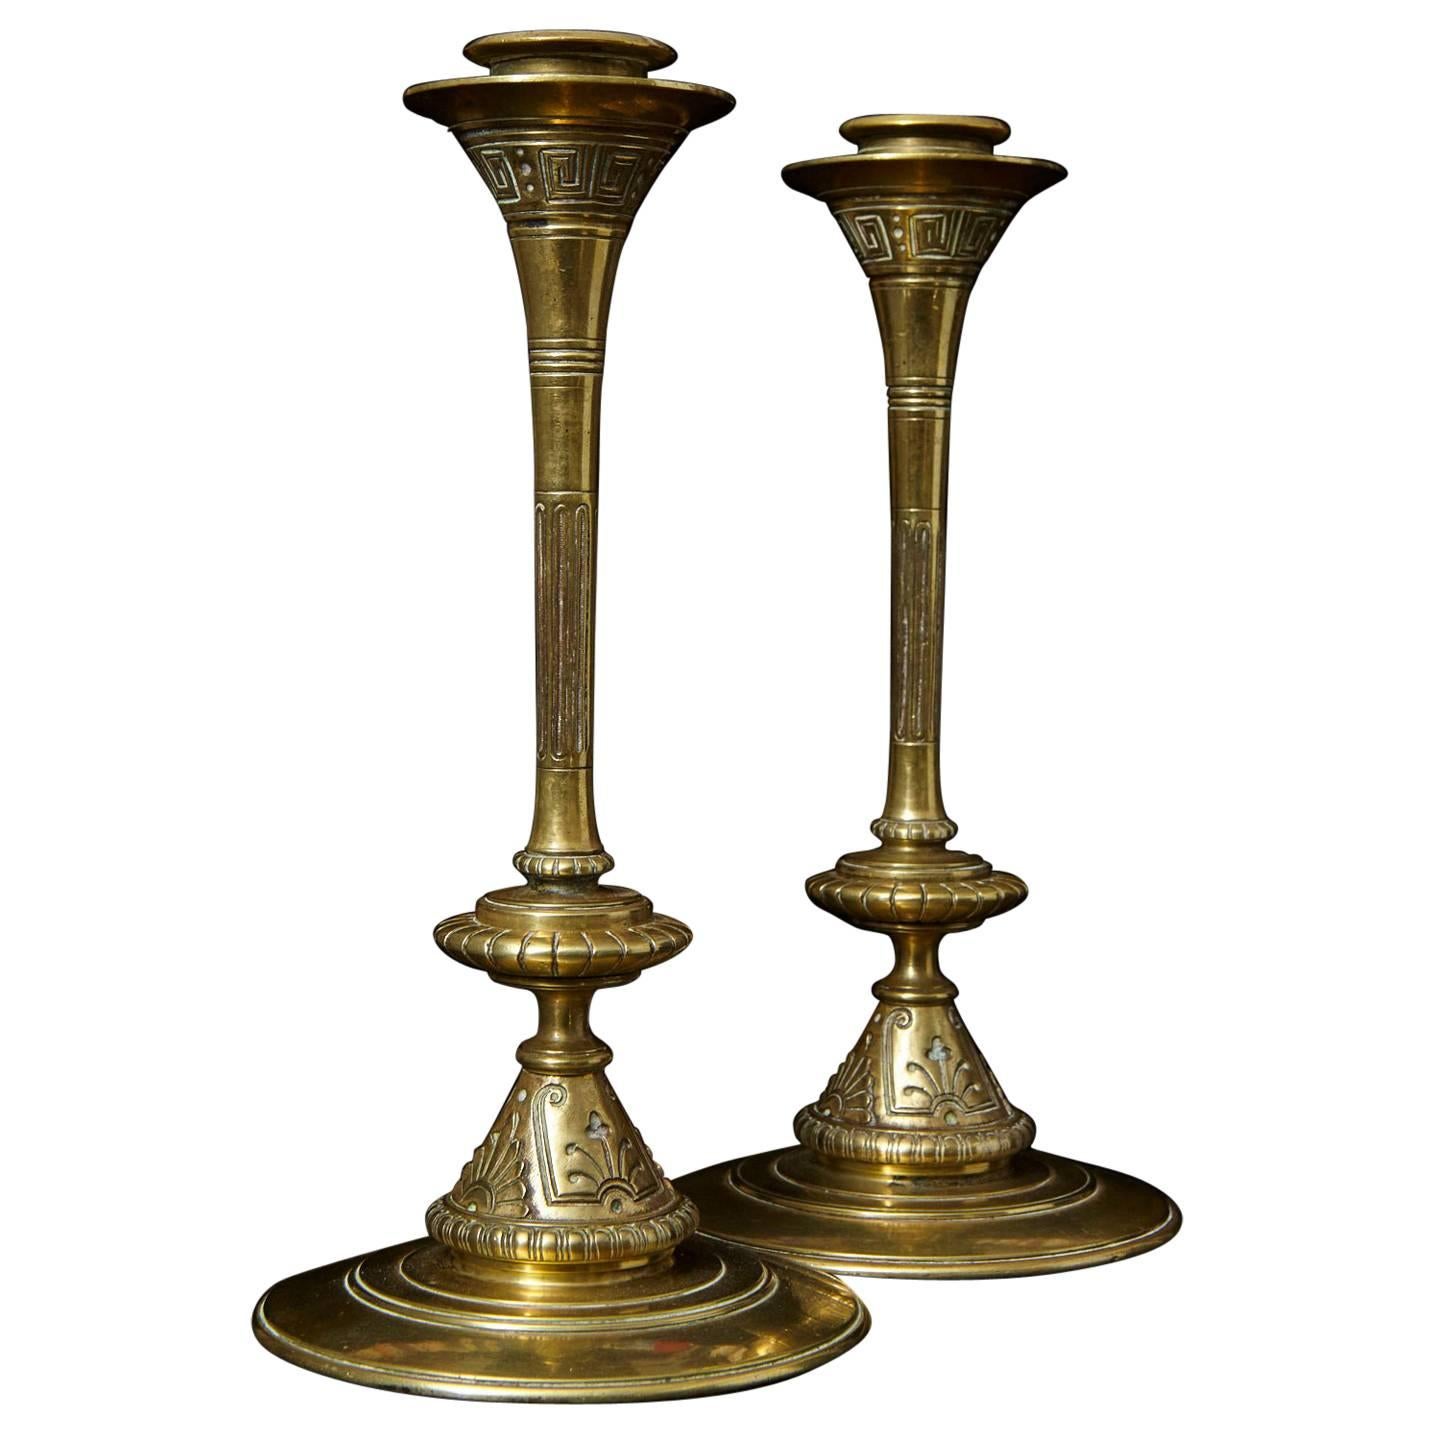 Pair of 19th Century Aesthetic Movement Trumpet Form Brass Candlesticks